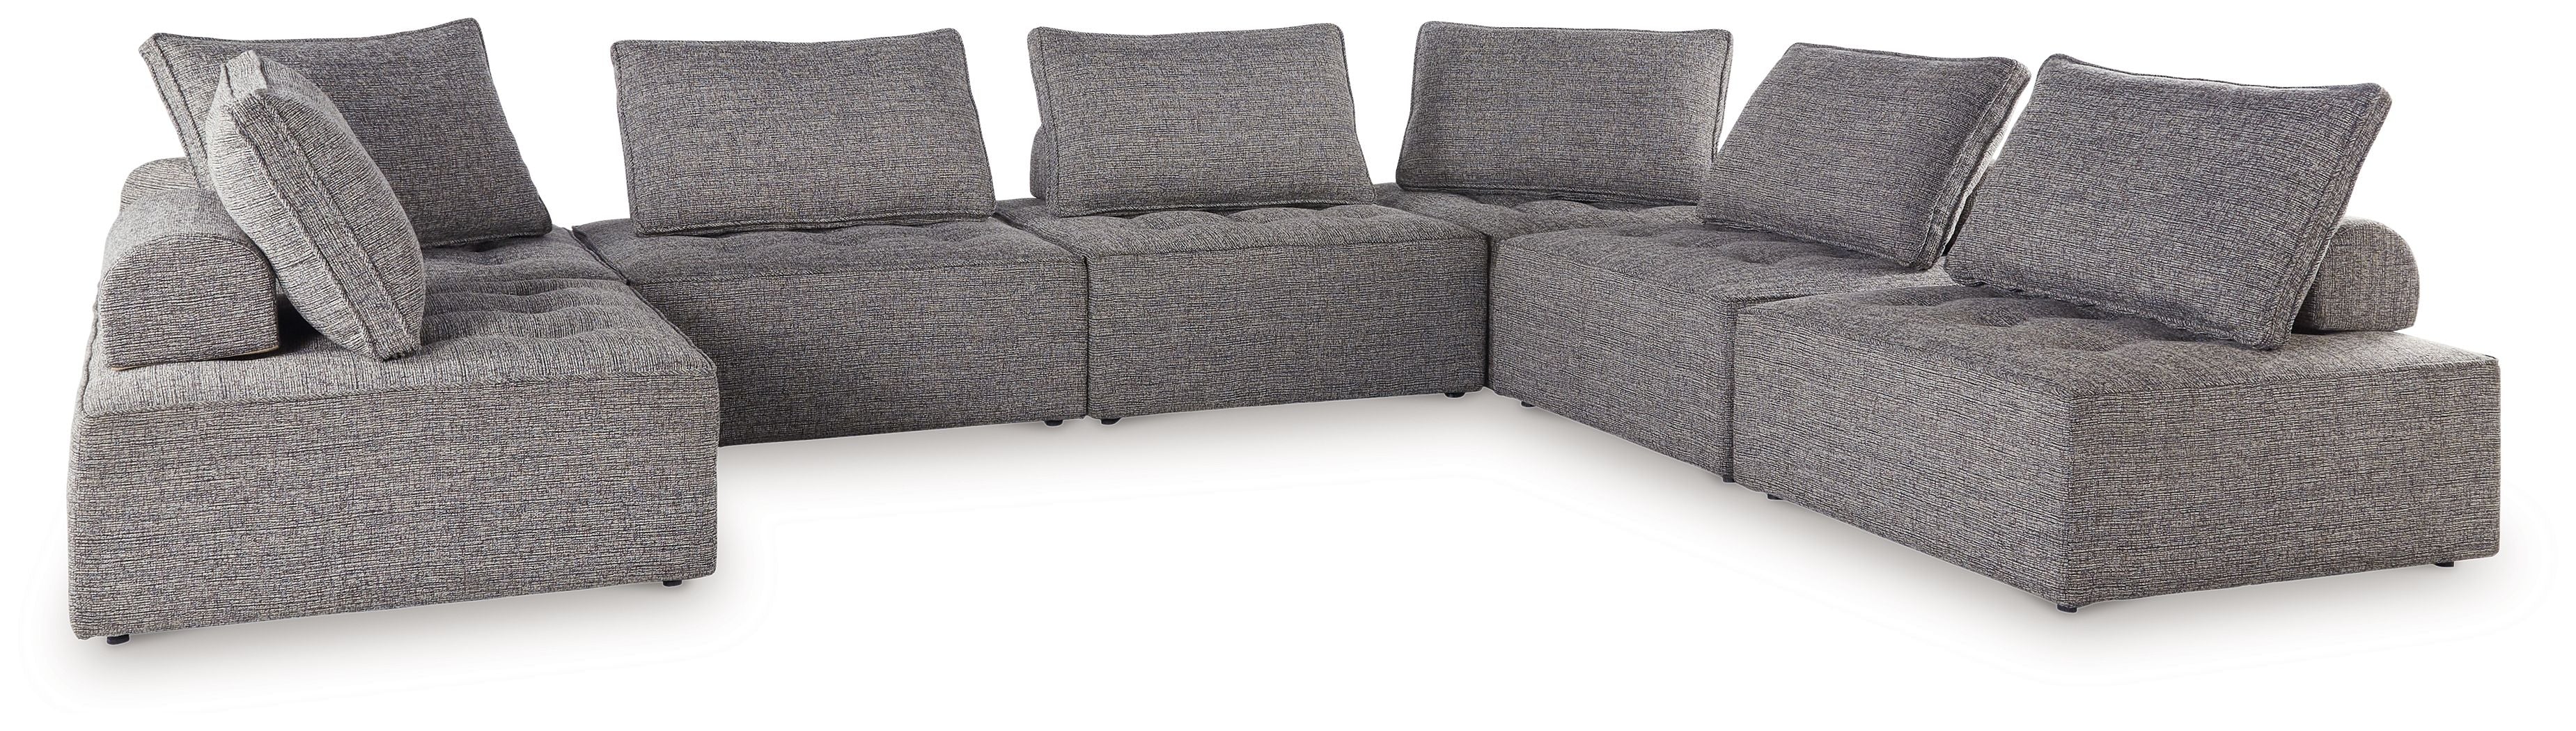 Bree Zee - Outdoor Sectional-Stationary Sectionals-American Furniture Outlet